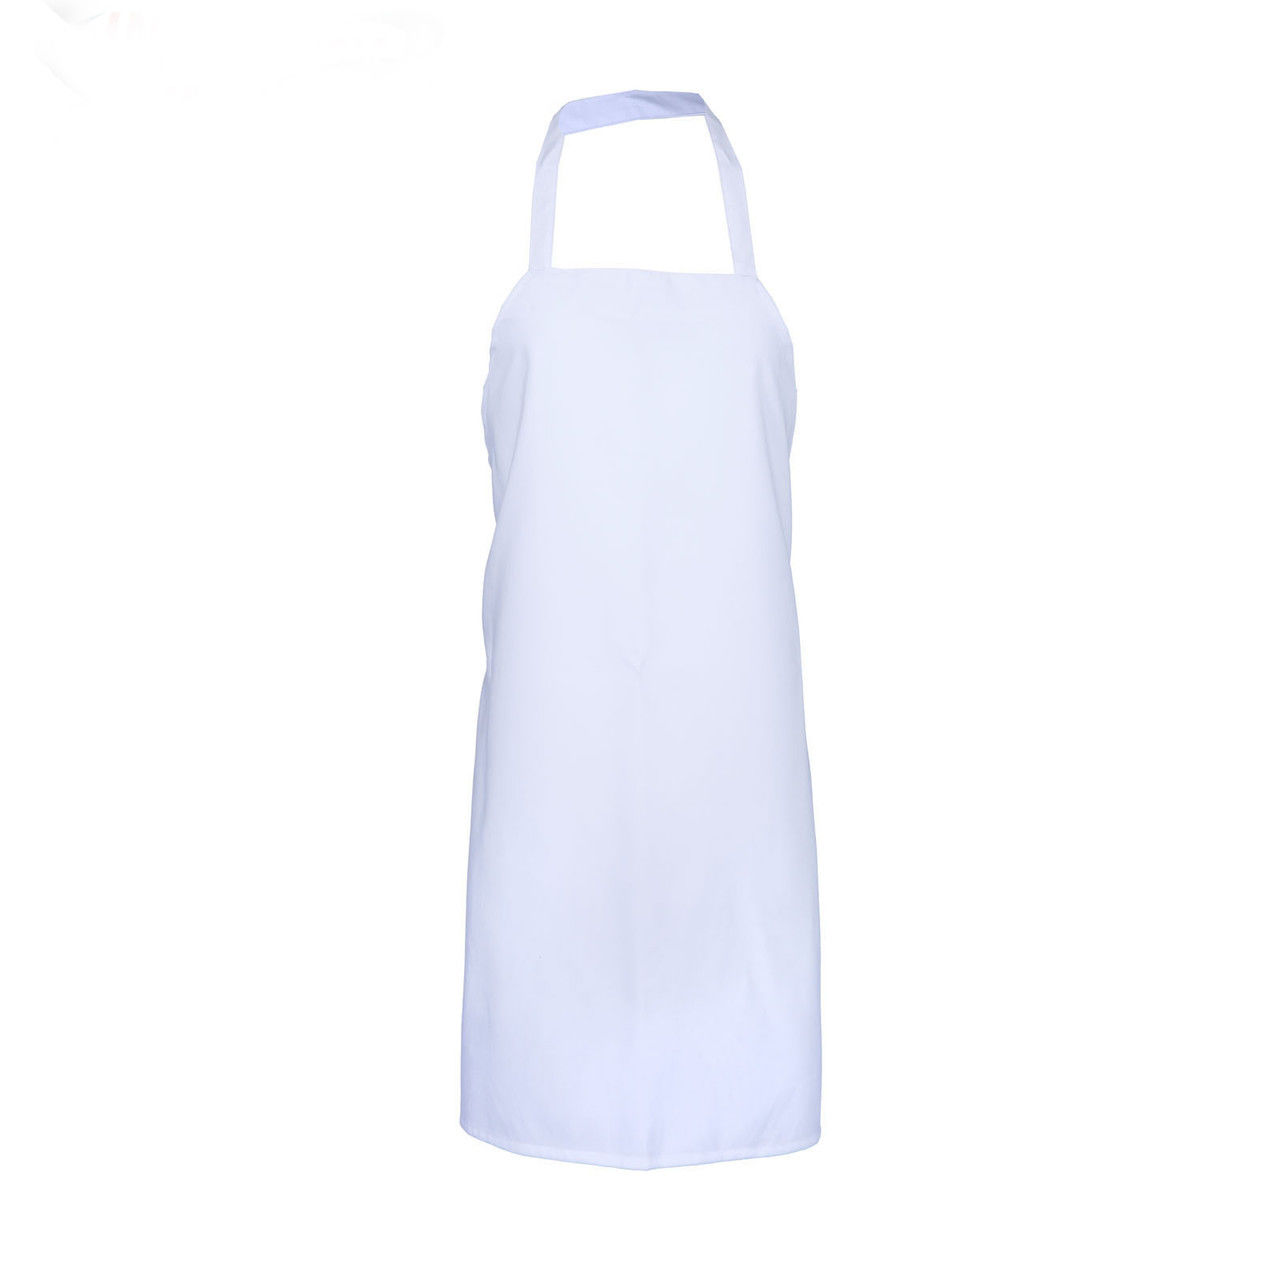 Is Pinnacle Textiles where my Basic Bib Apron will ship from?